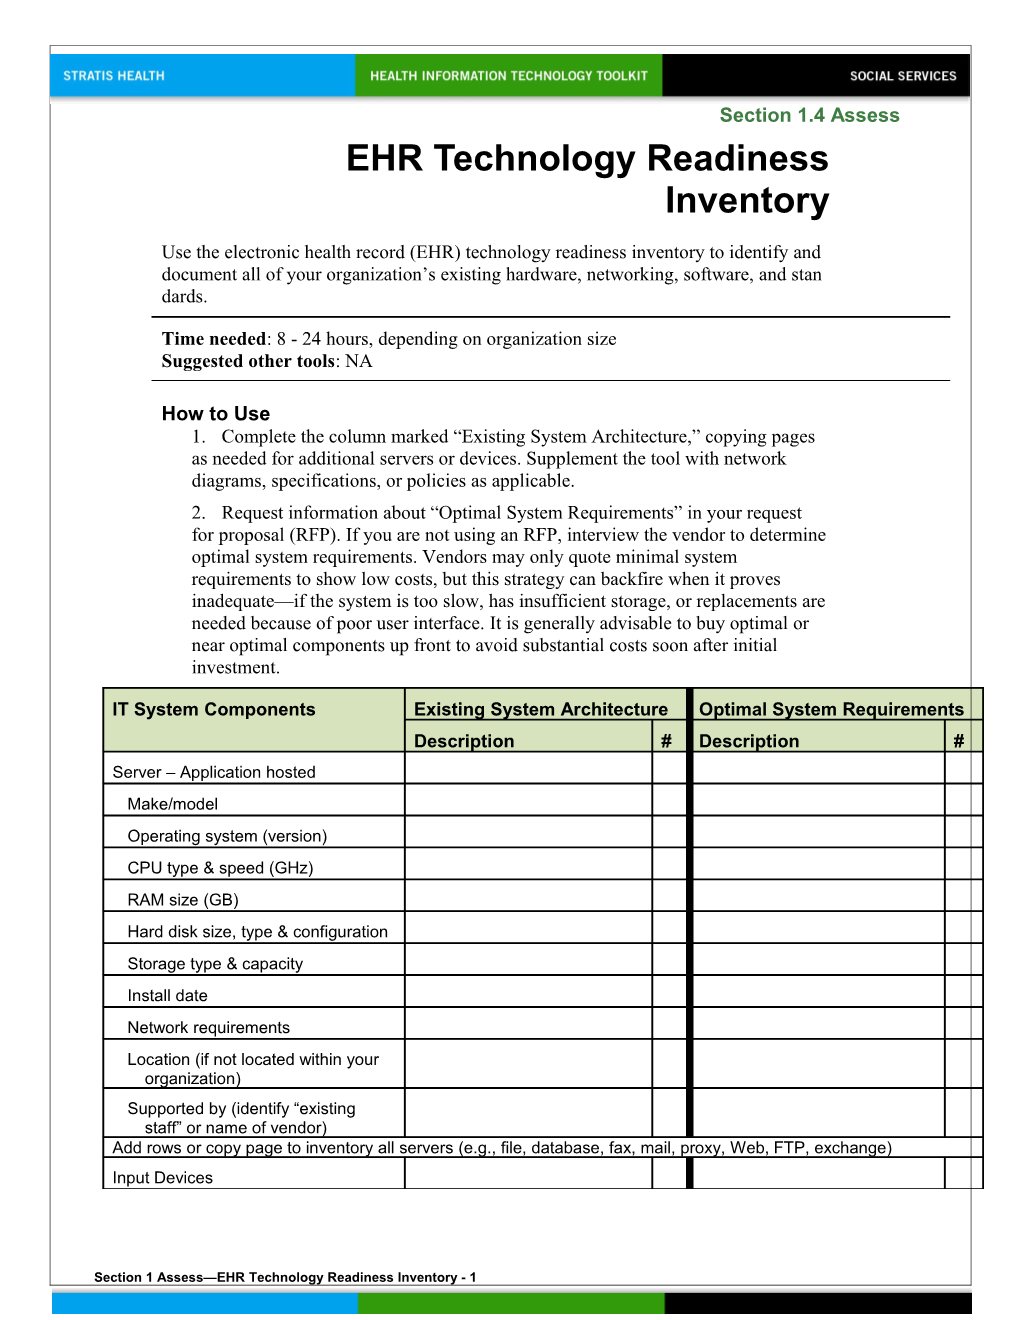 1 EHR Technology Readiness Inventory